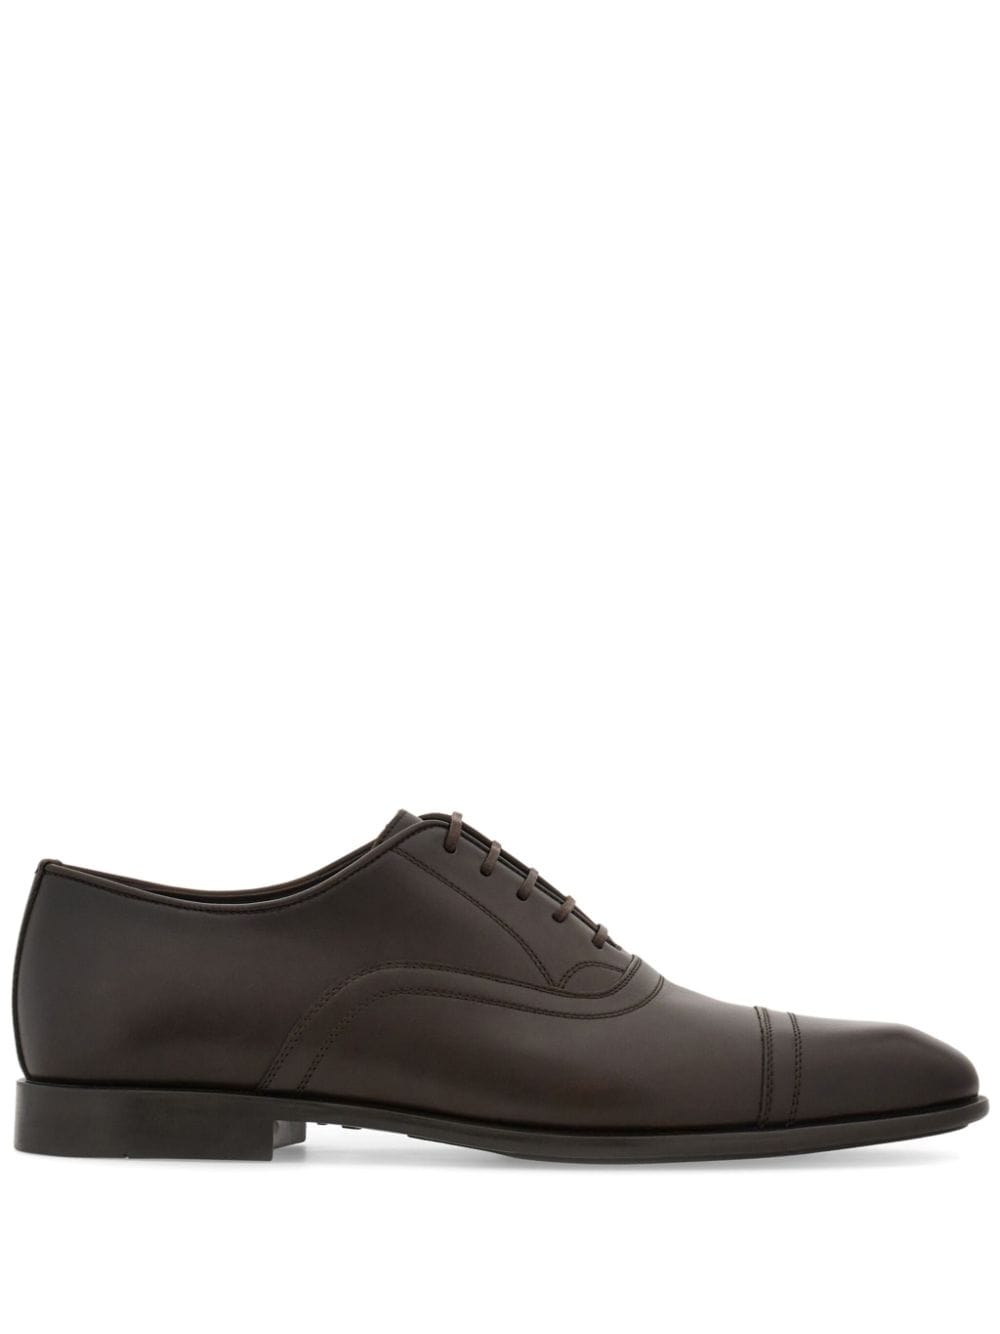 Ferragamo Leather Oxford Shoes In Brown